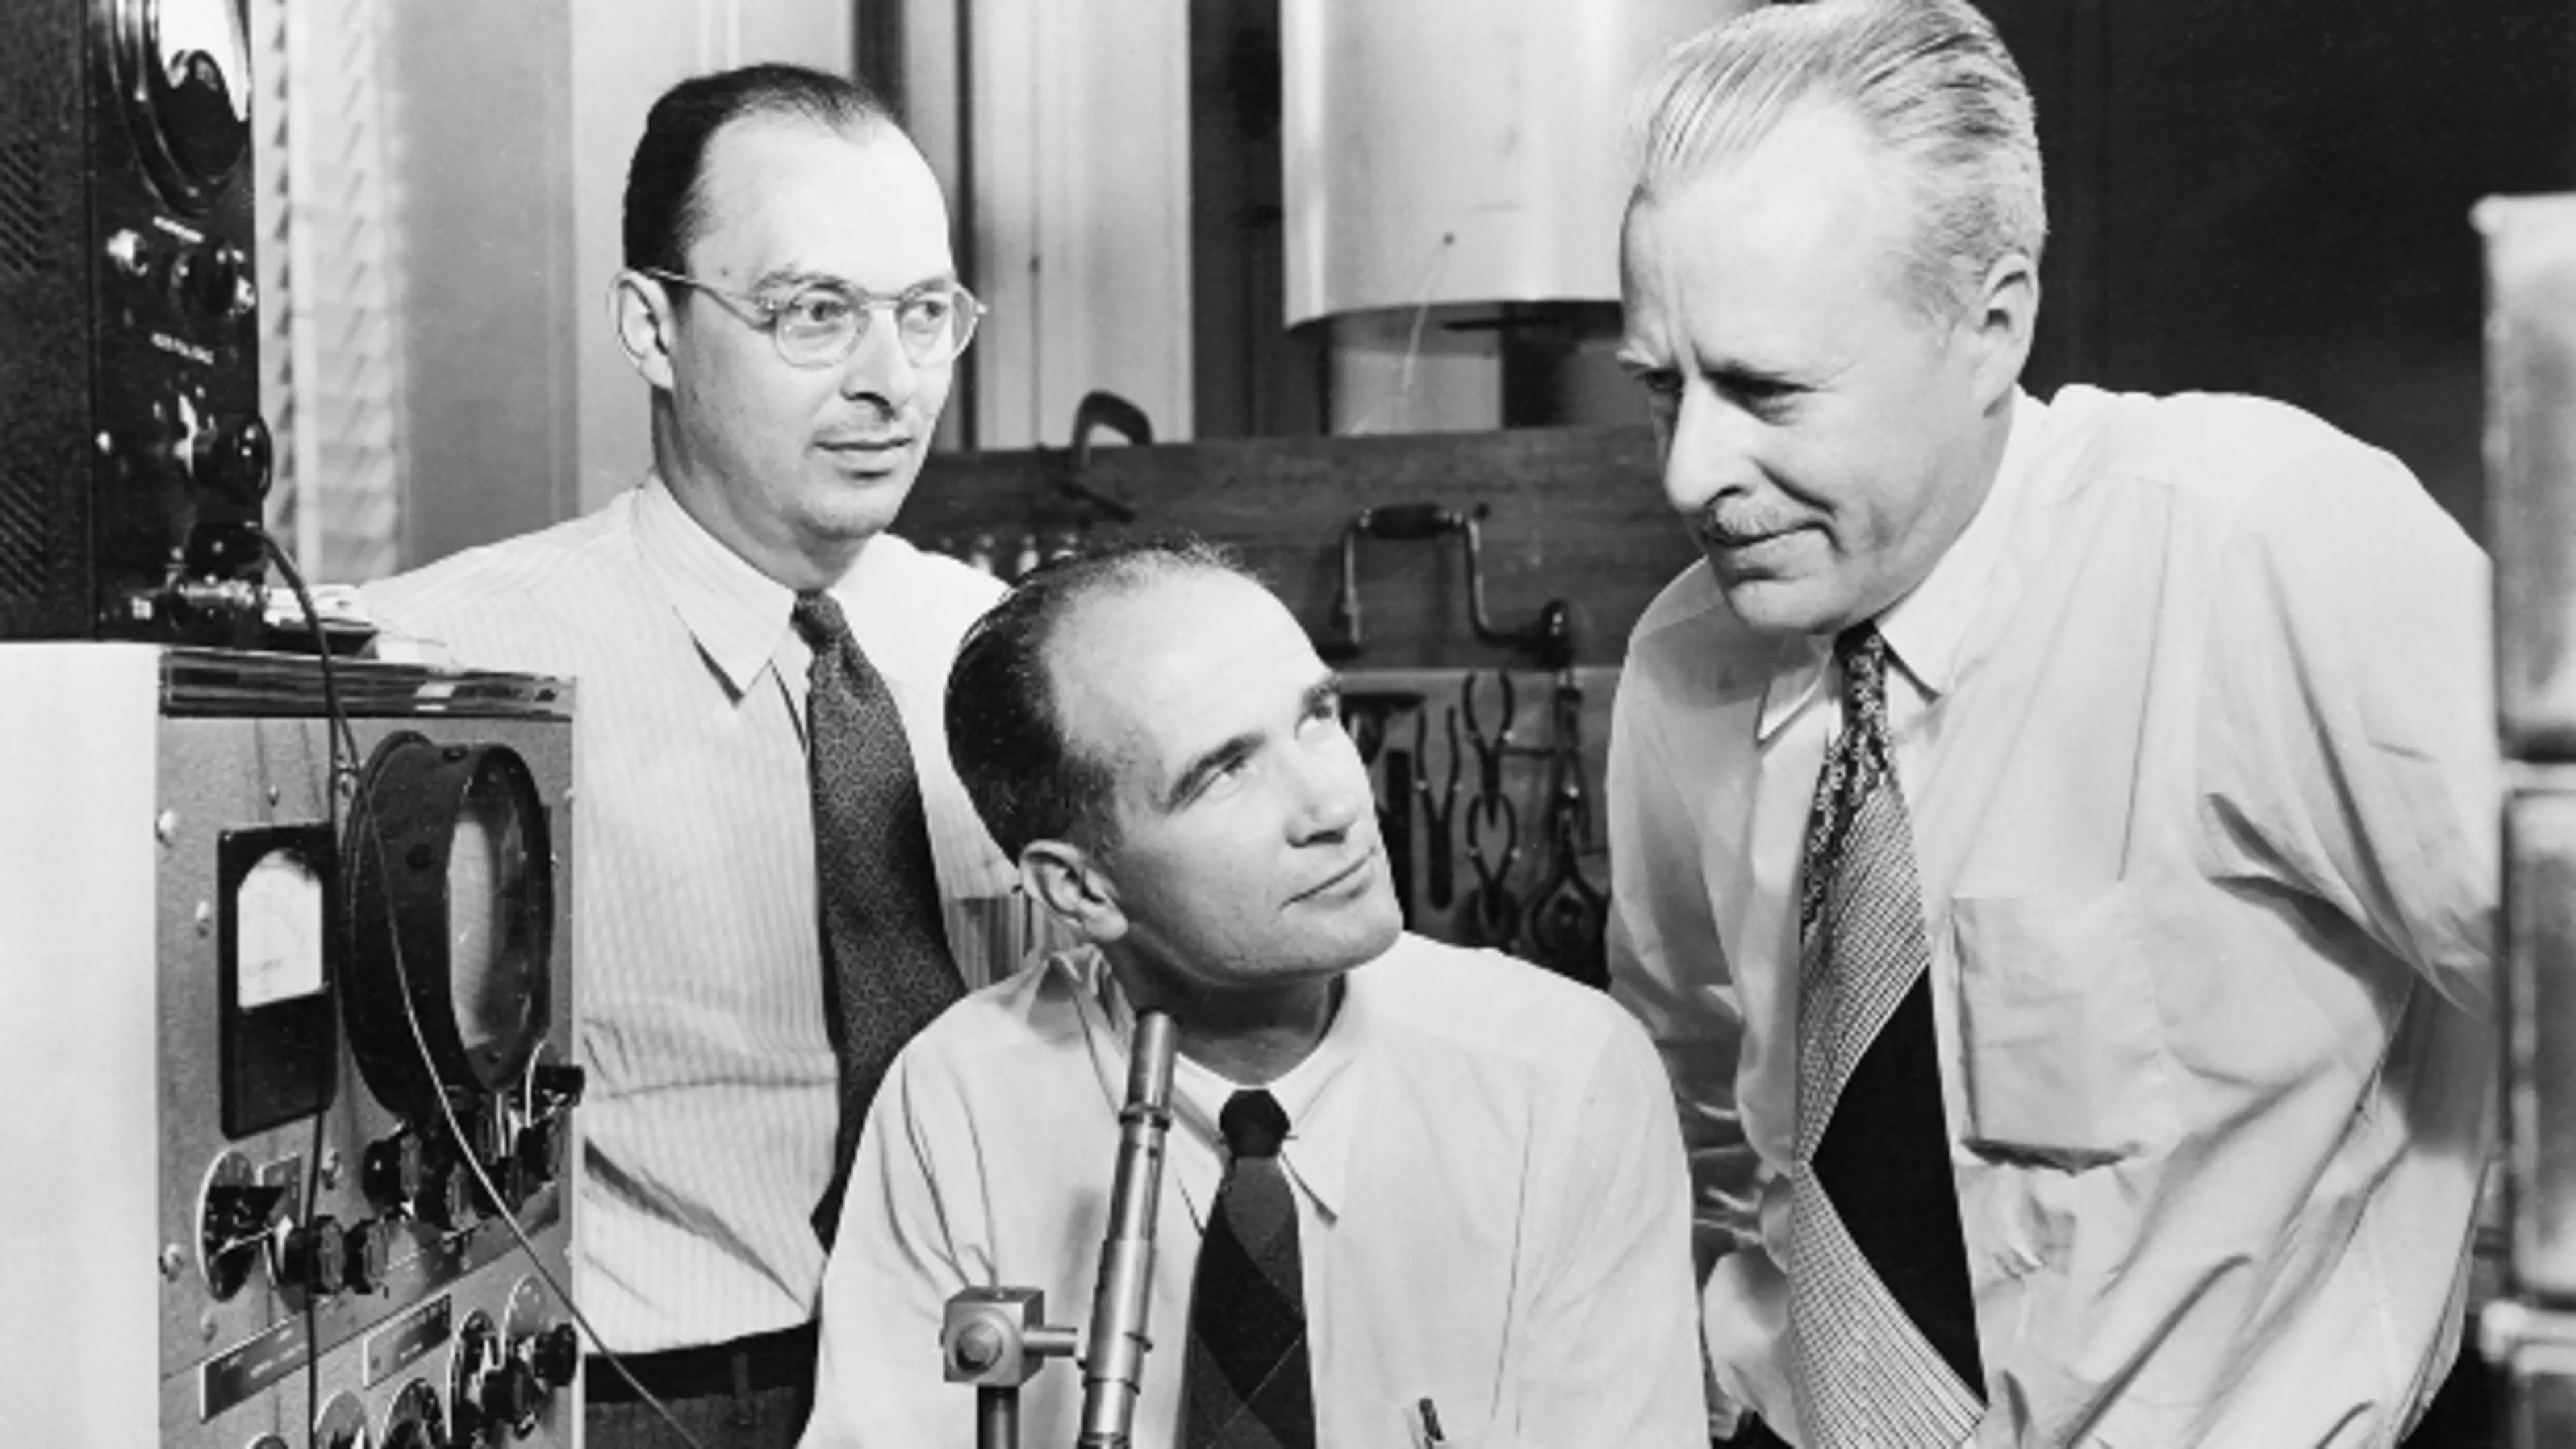 From the left here is Bardeen, Shockley and Brattain, all of whom won The Nobel Prize in Physics in 1956 for their invention of the transistor. The picture is from their time as colleagues at Bell Labs.